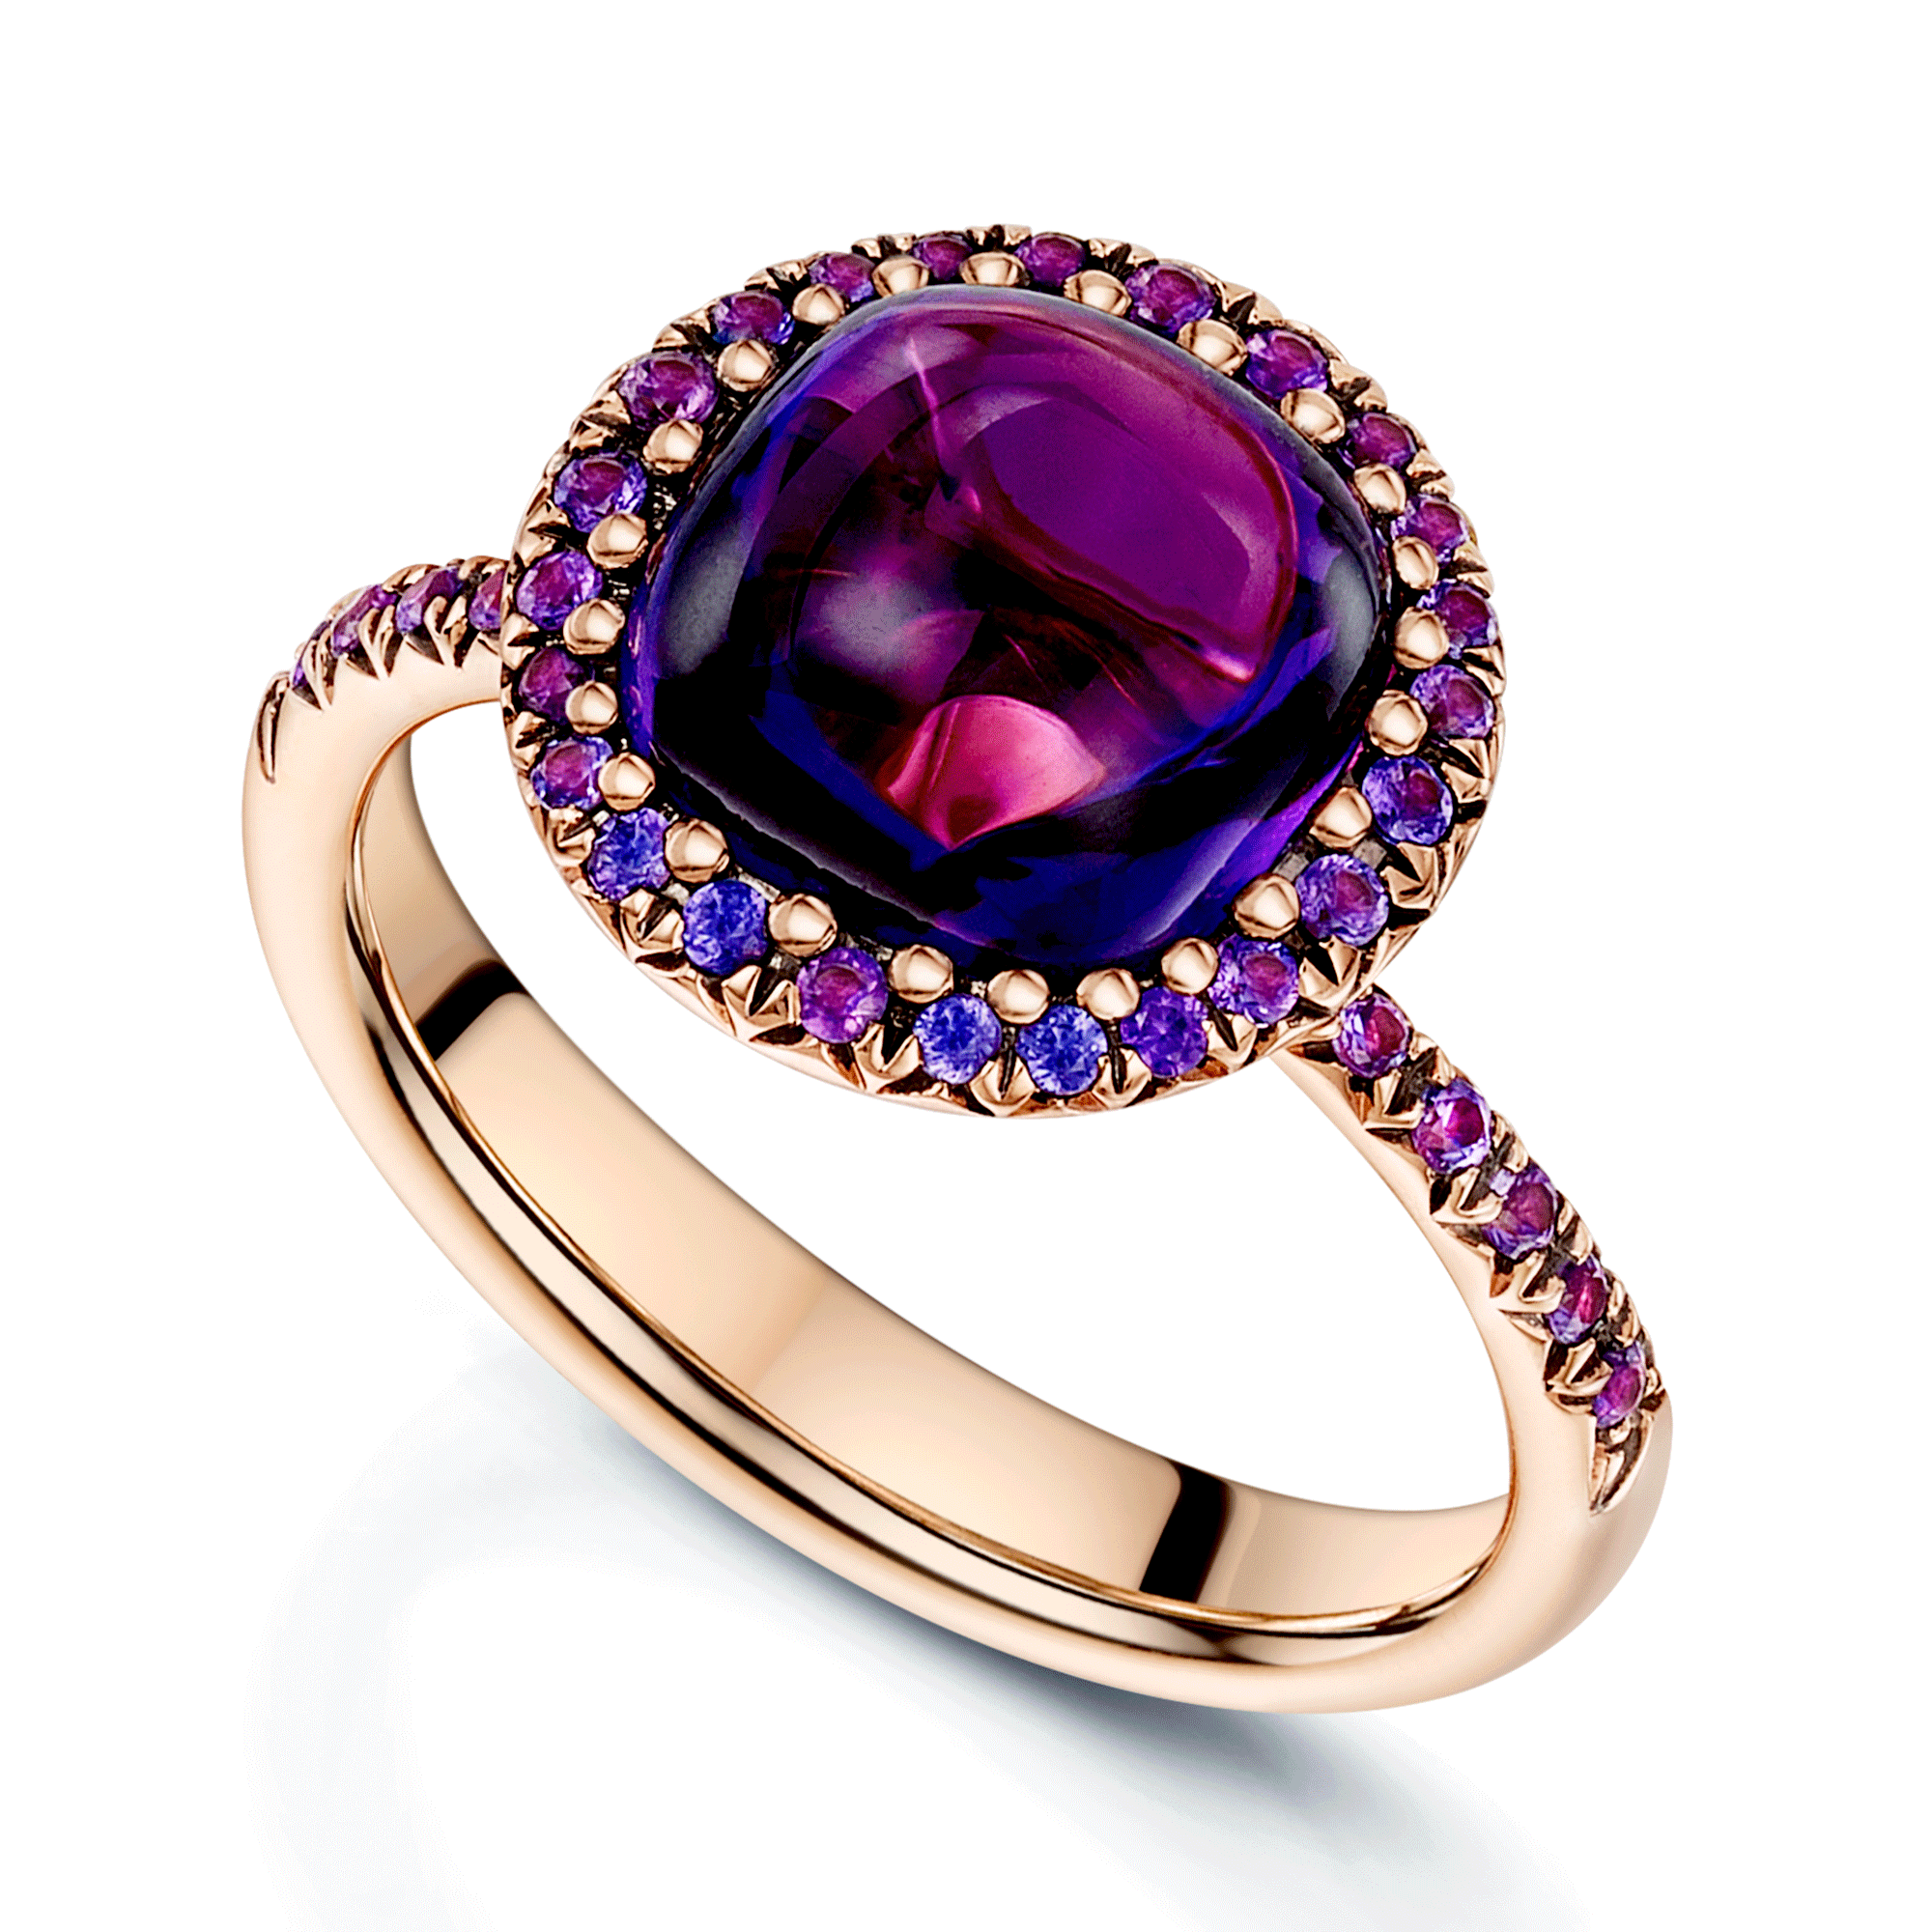 18ct Rose Gold Amethyst Cabachon Halo Dress Ring With Purple Sapphire Shoulders